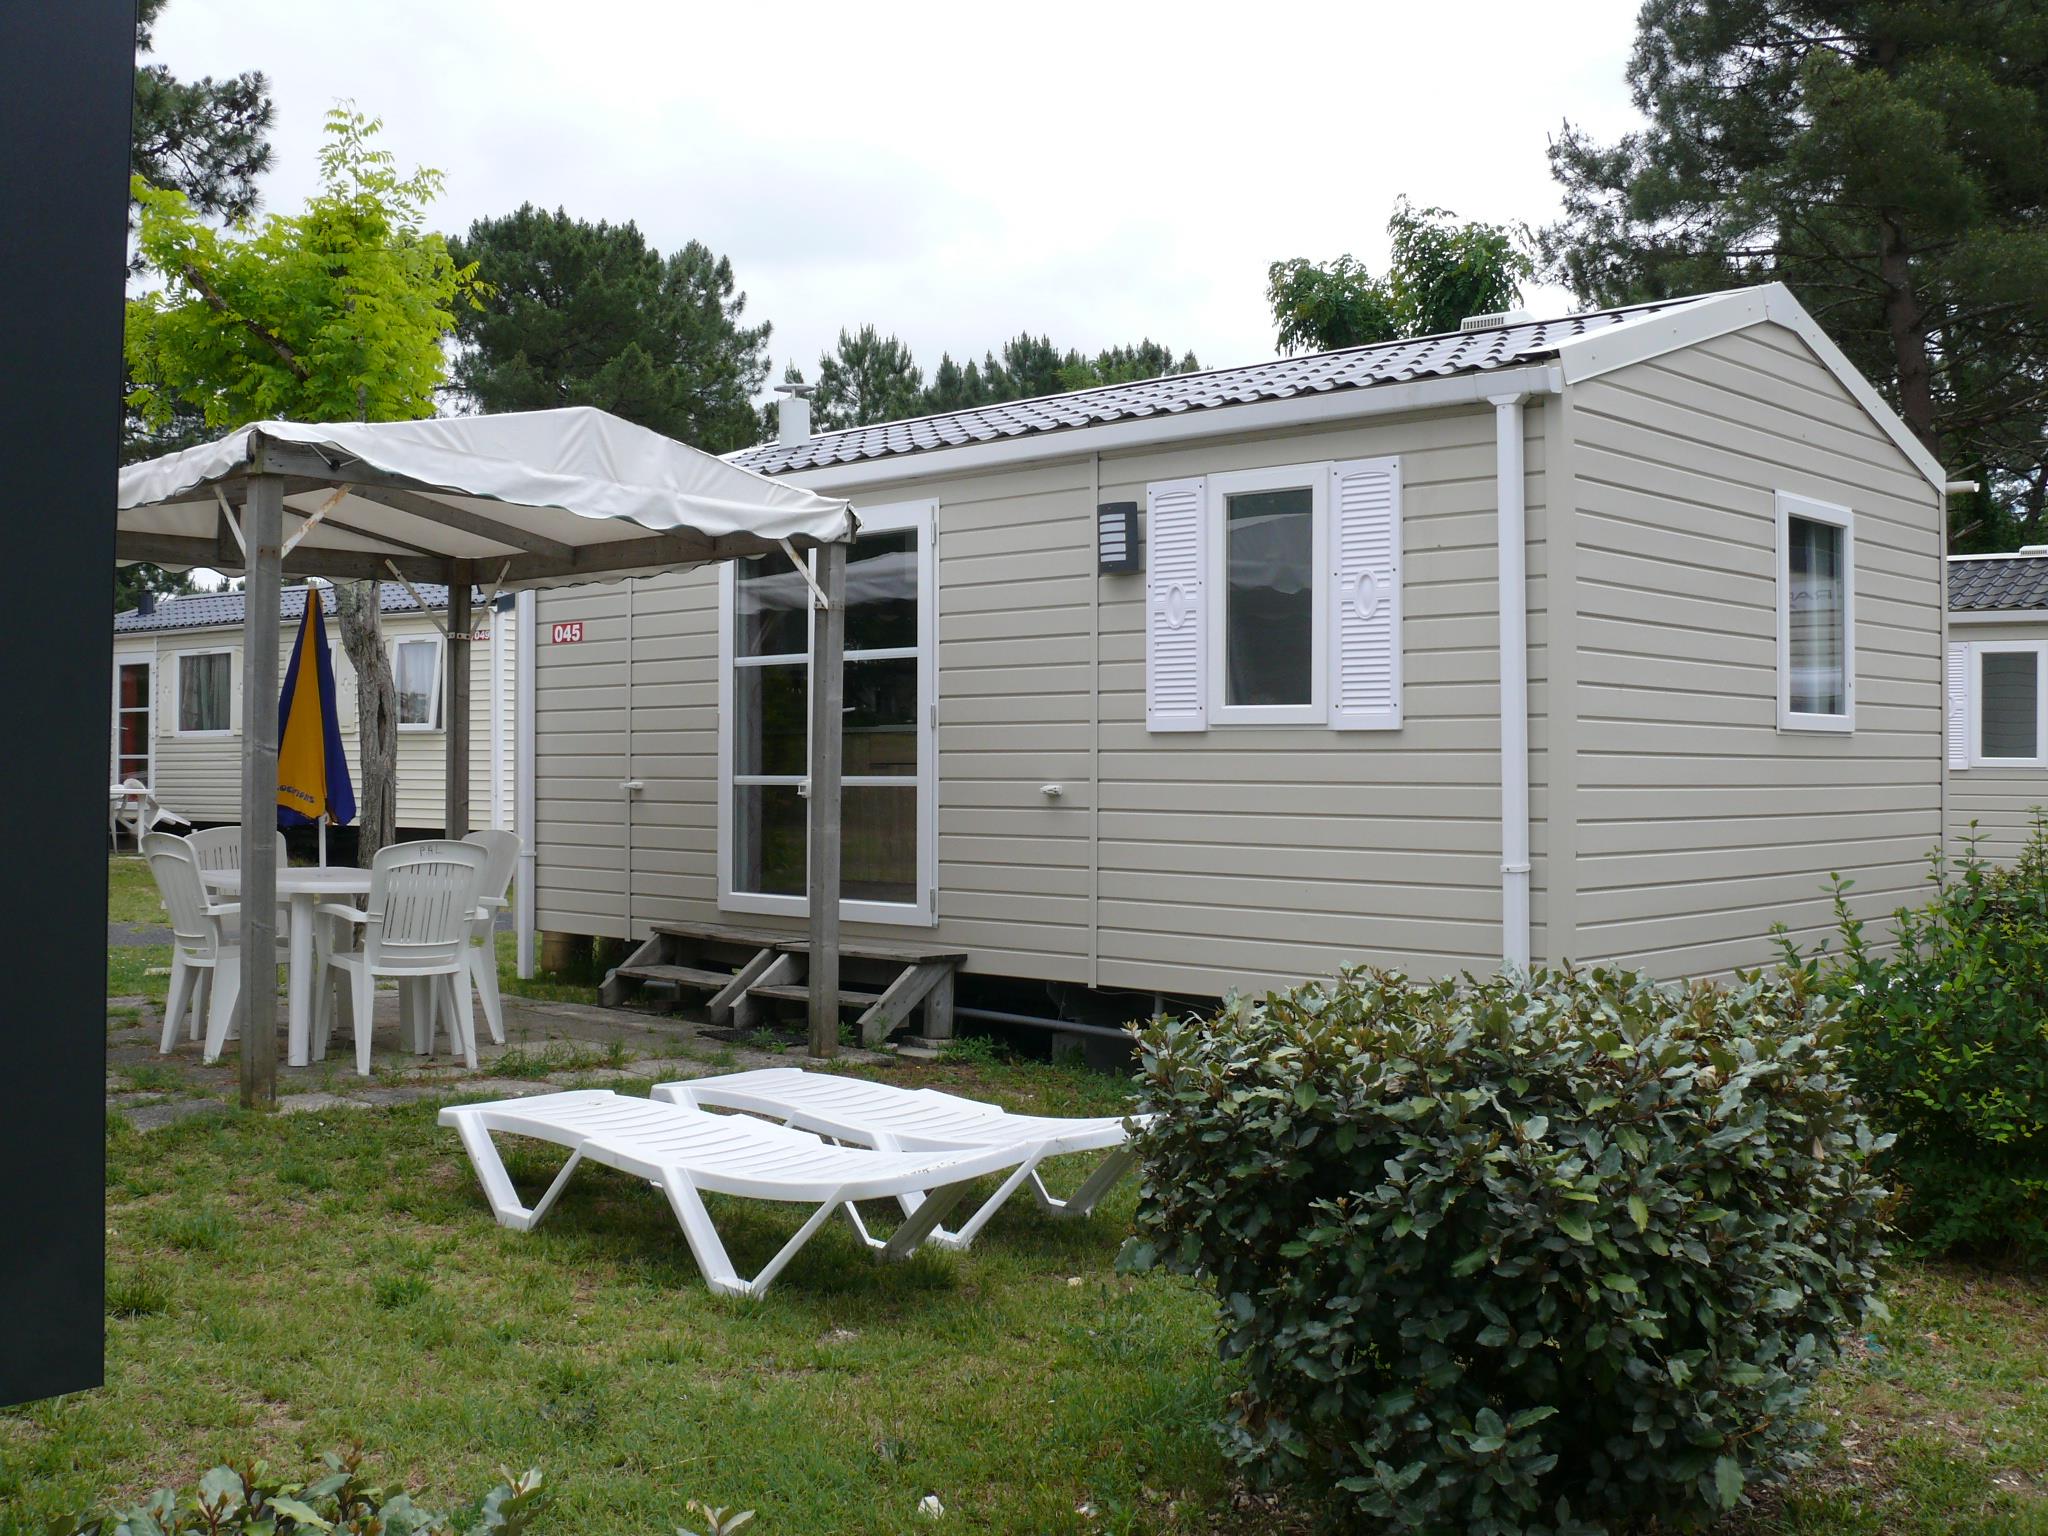 Accommodation - Mh Gamme Liberté 2 Chambres 23-24 M² 2 À 4 Personnes - Plein Air Locations- camping Palmyre Loisirs